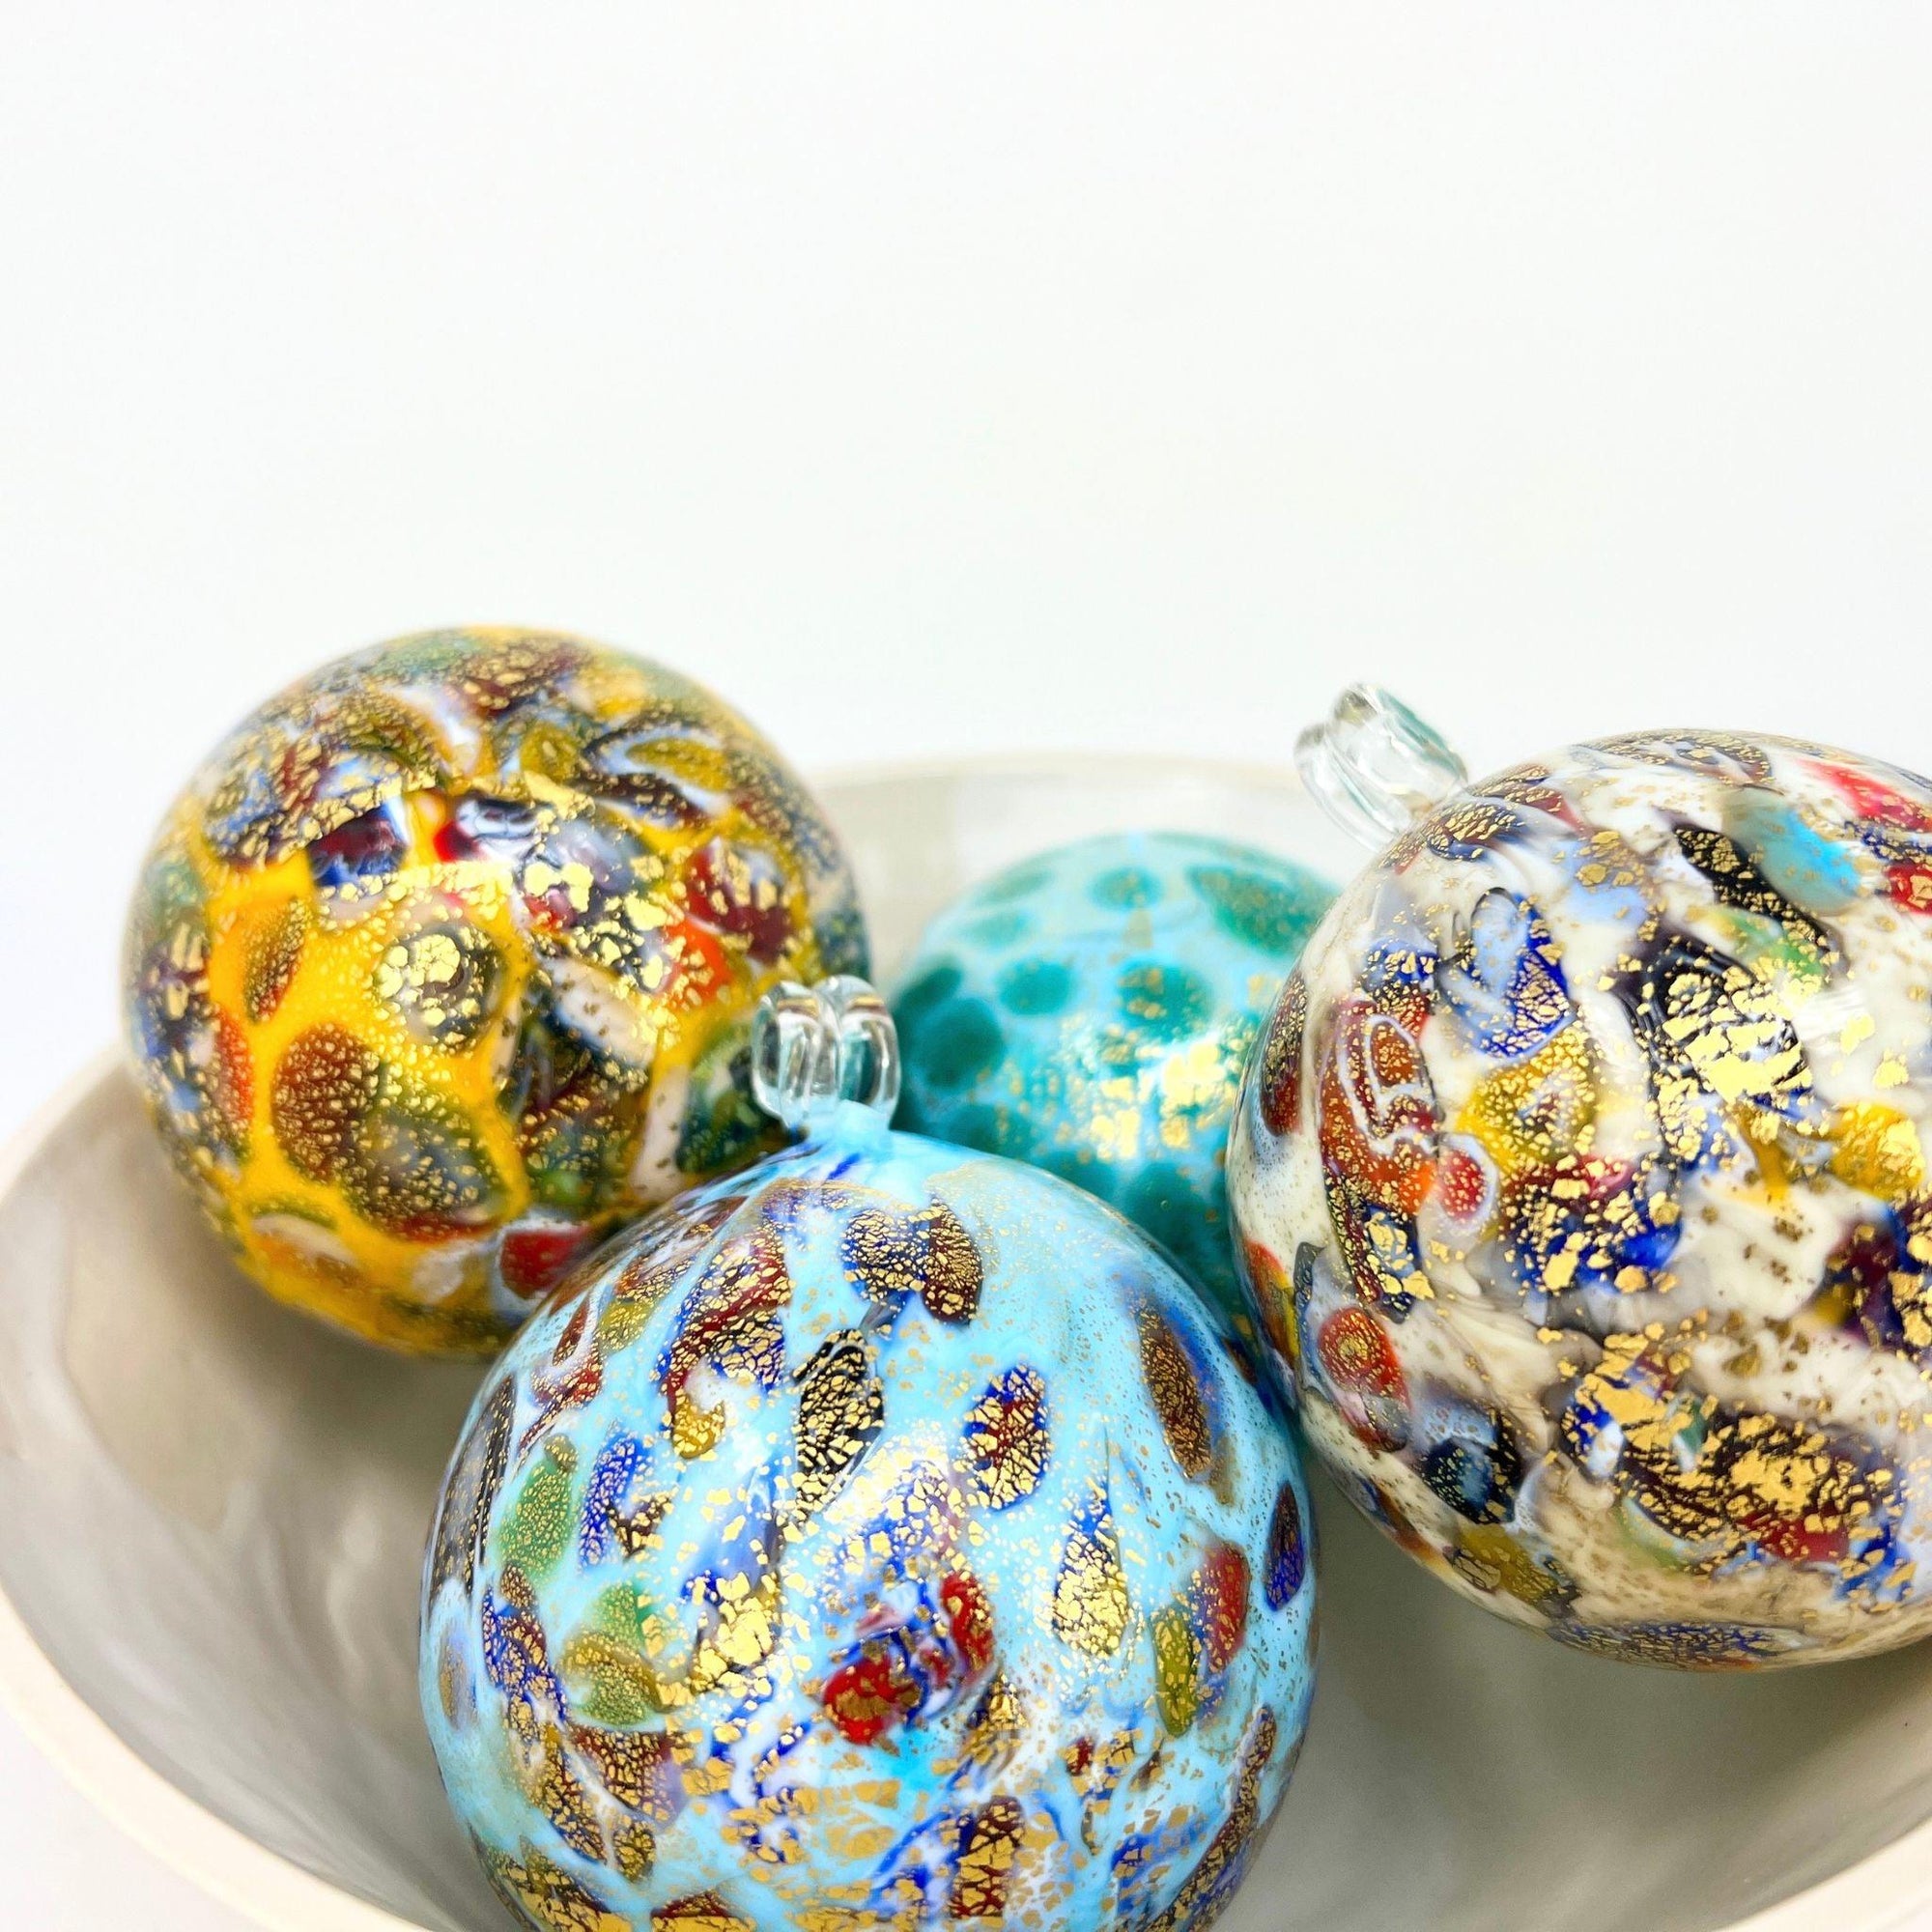 Murano Blown Glass Holiday Ornament with Spotted Macchia Accents, Made in Murano, Italy at MyItalianDecor